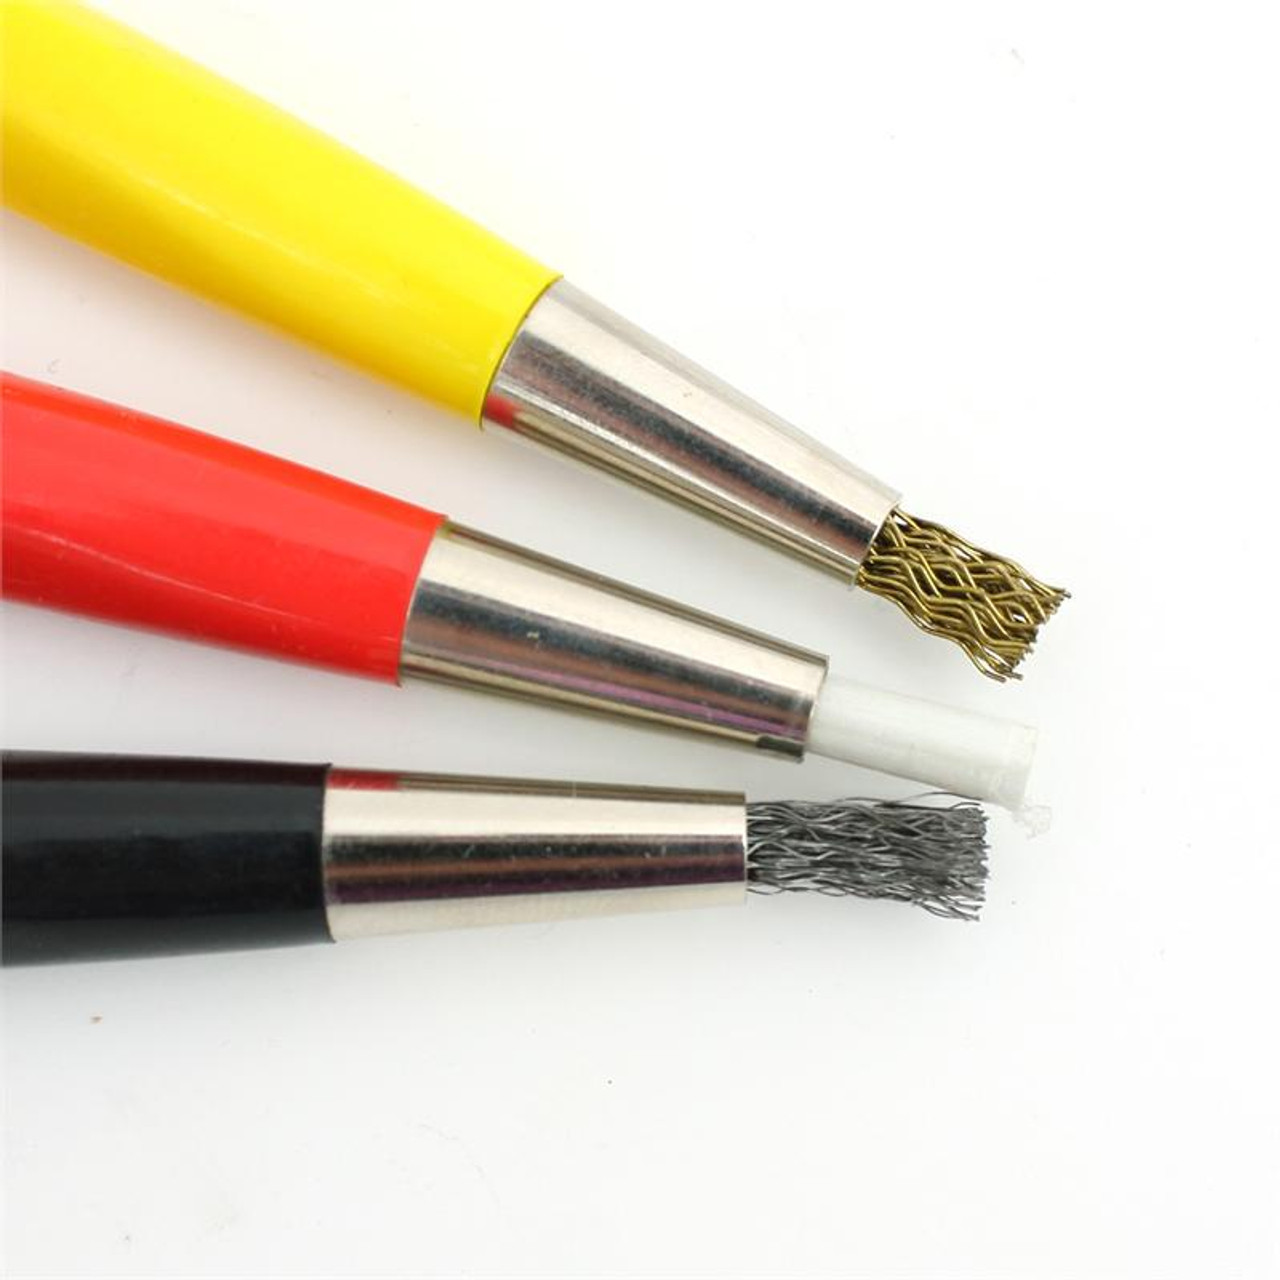 3 pc Scratch Brush Set for Removing Rust and Corrosion and